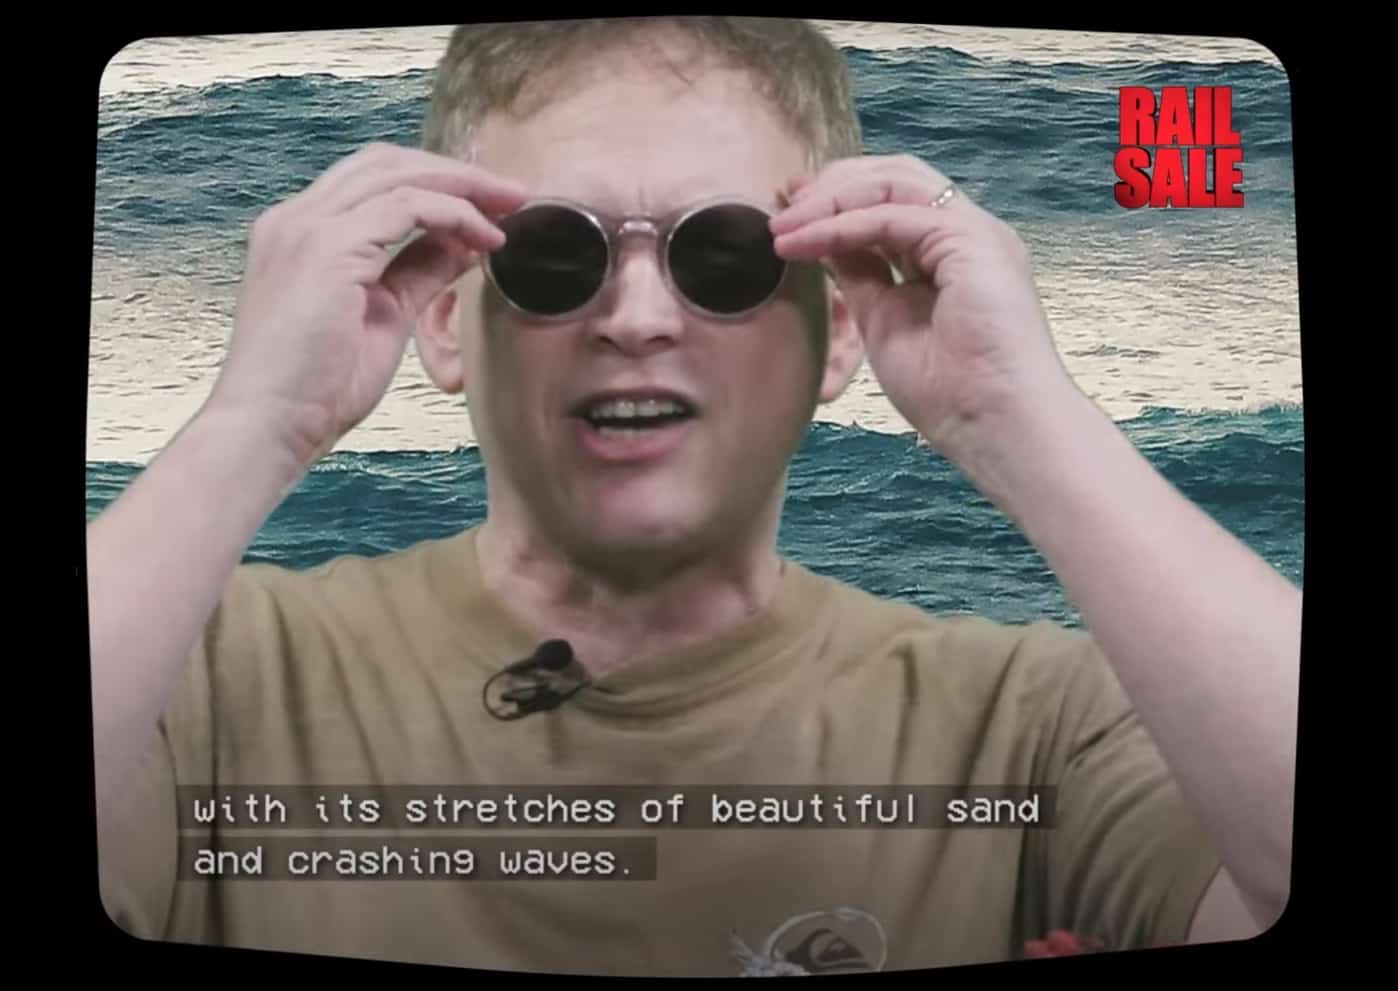 Shapps dons shades in cringe ‘Great British rail sale’ promo